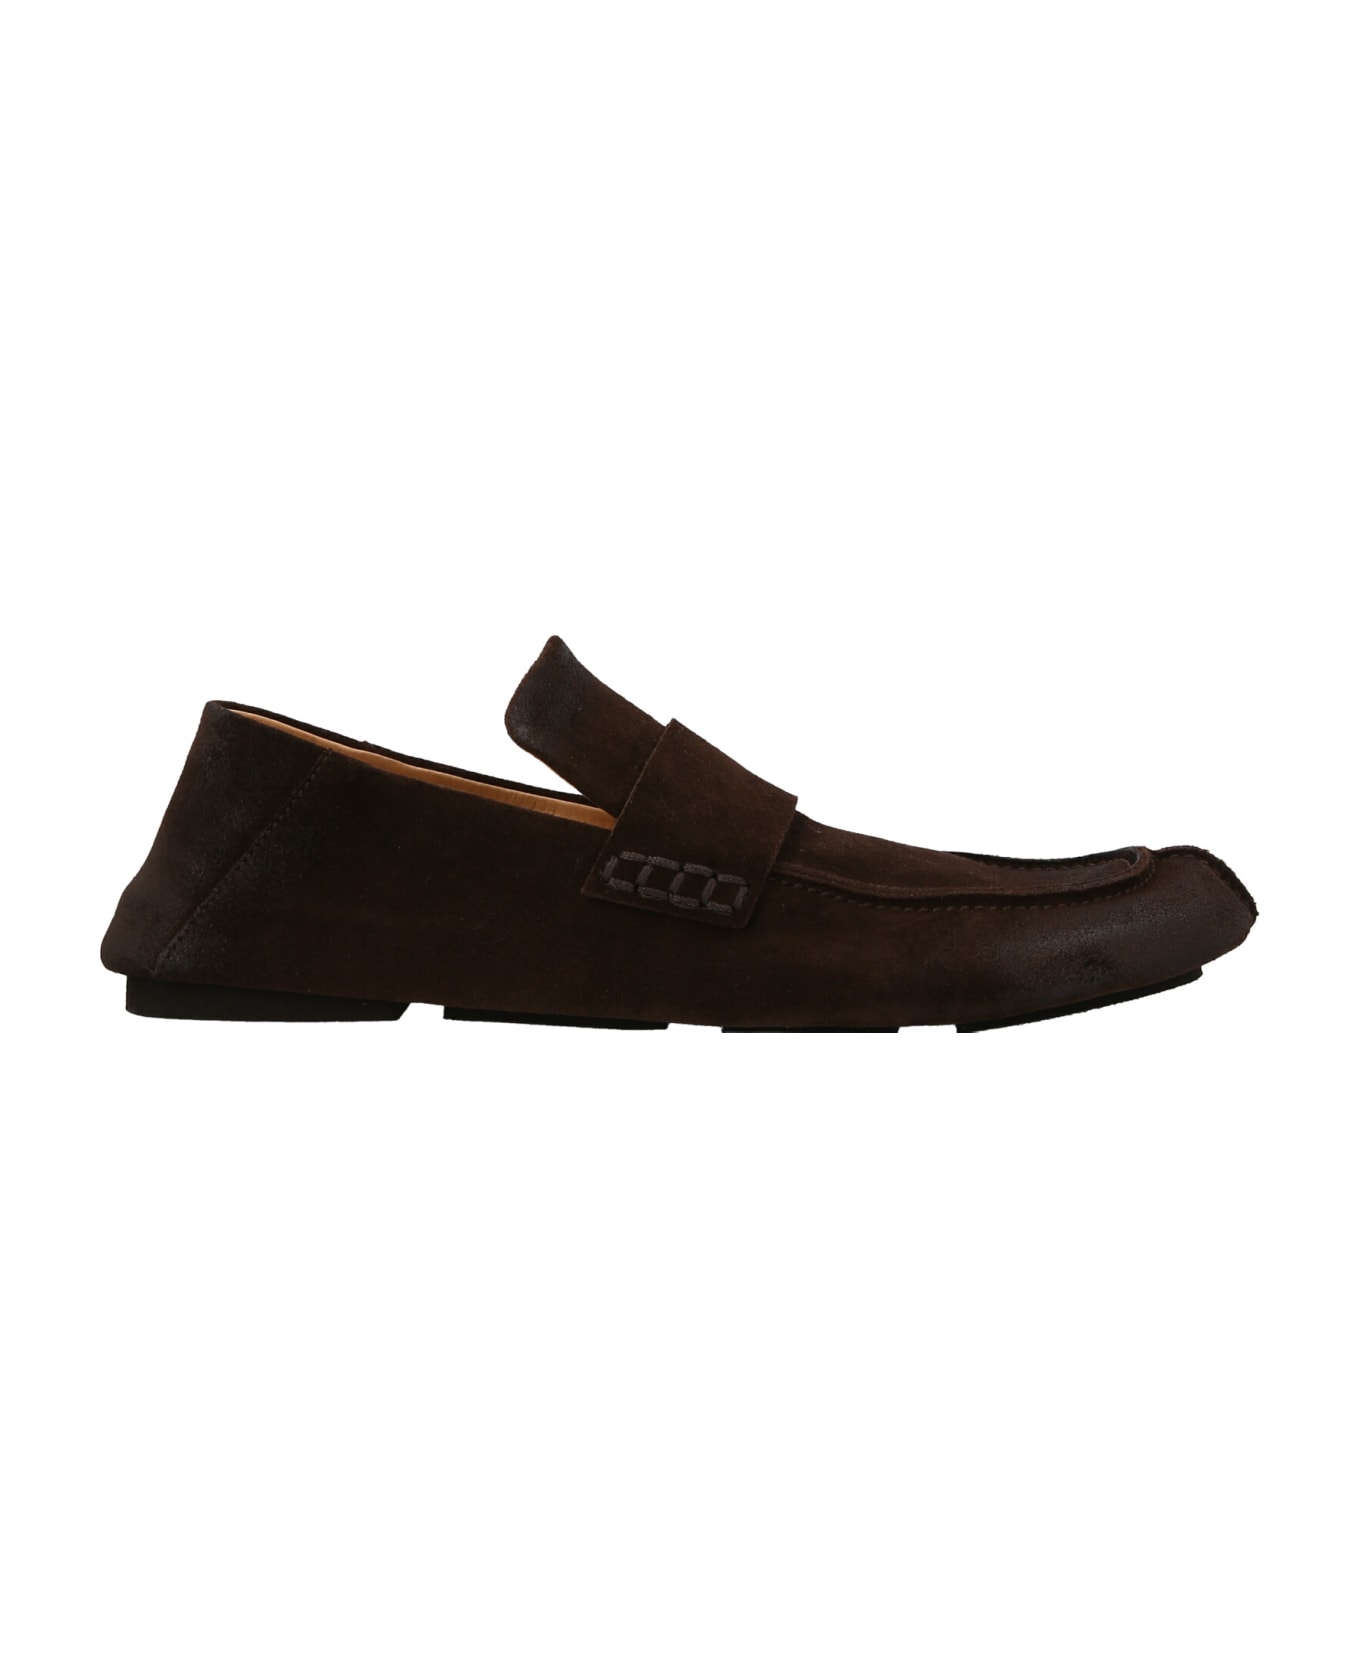 Marsell 'toddoni' Loafers - Brown